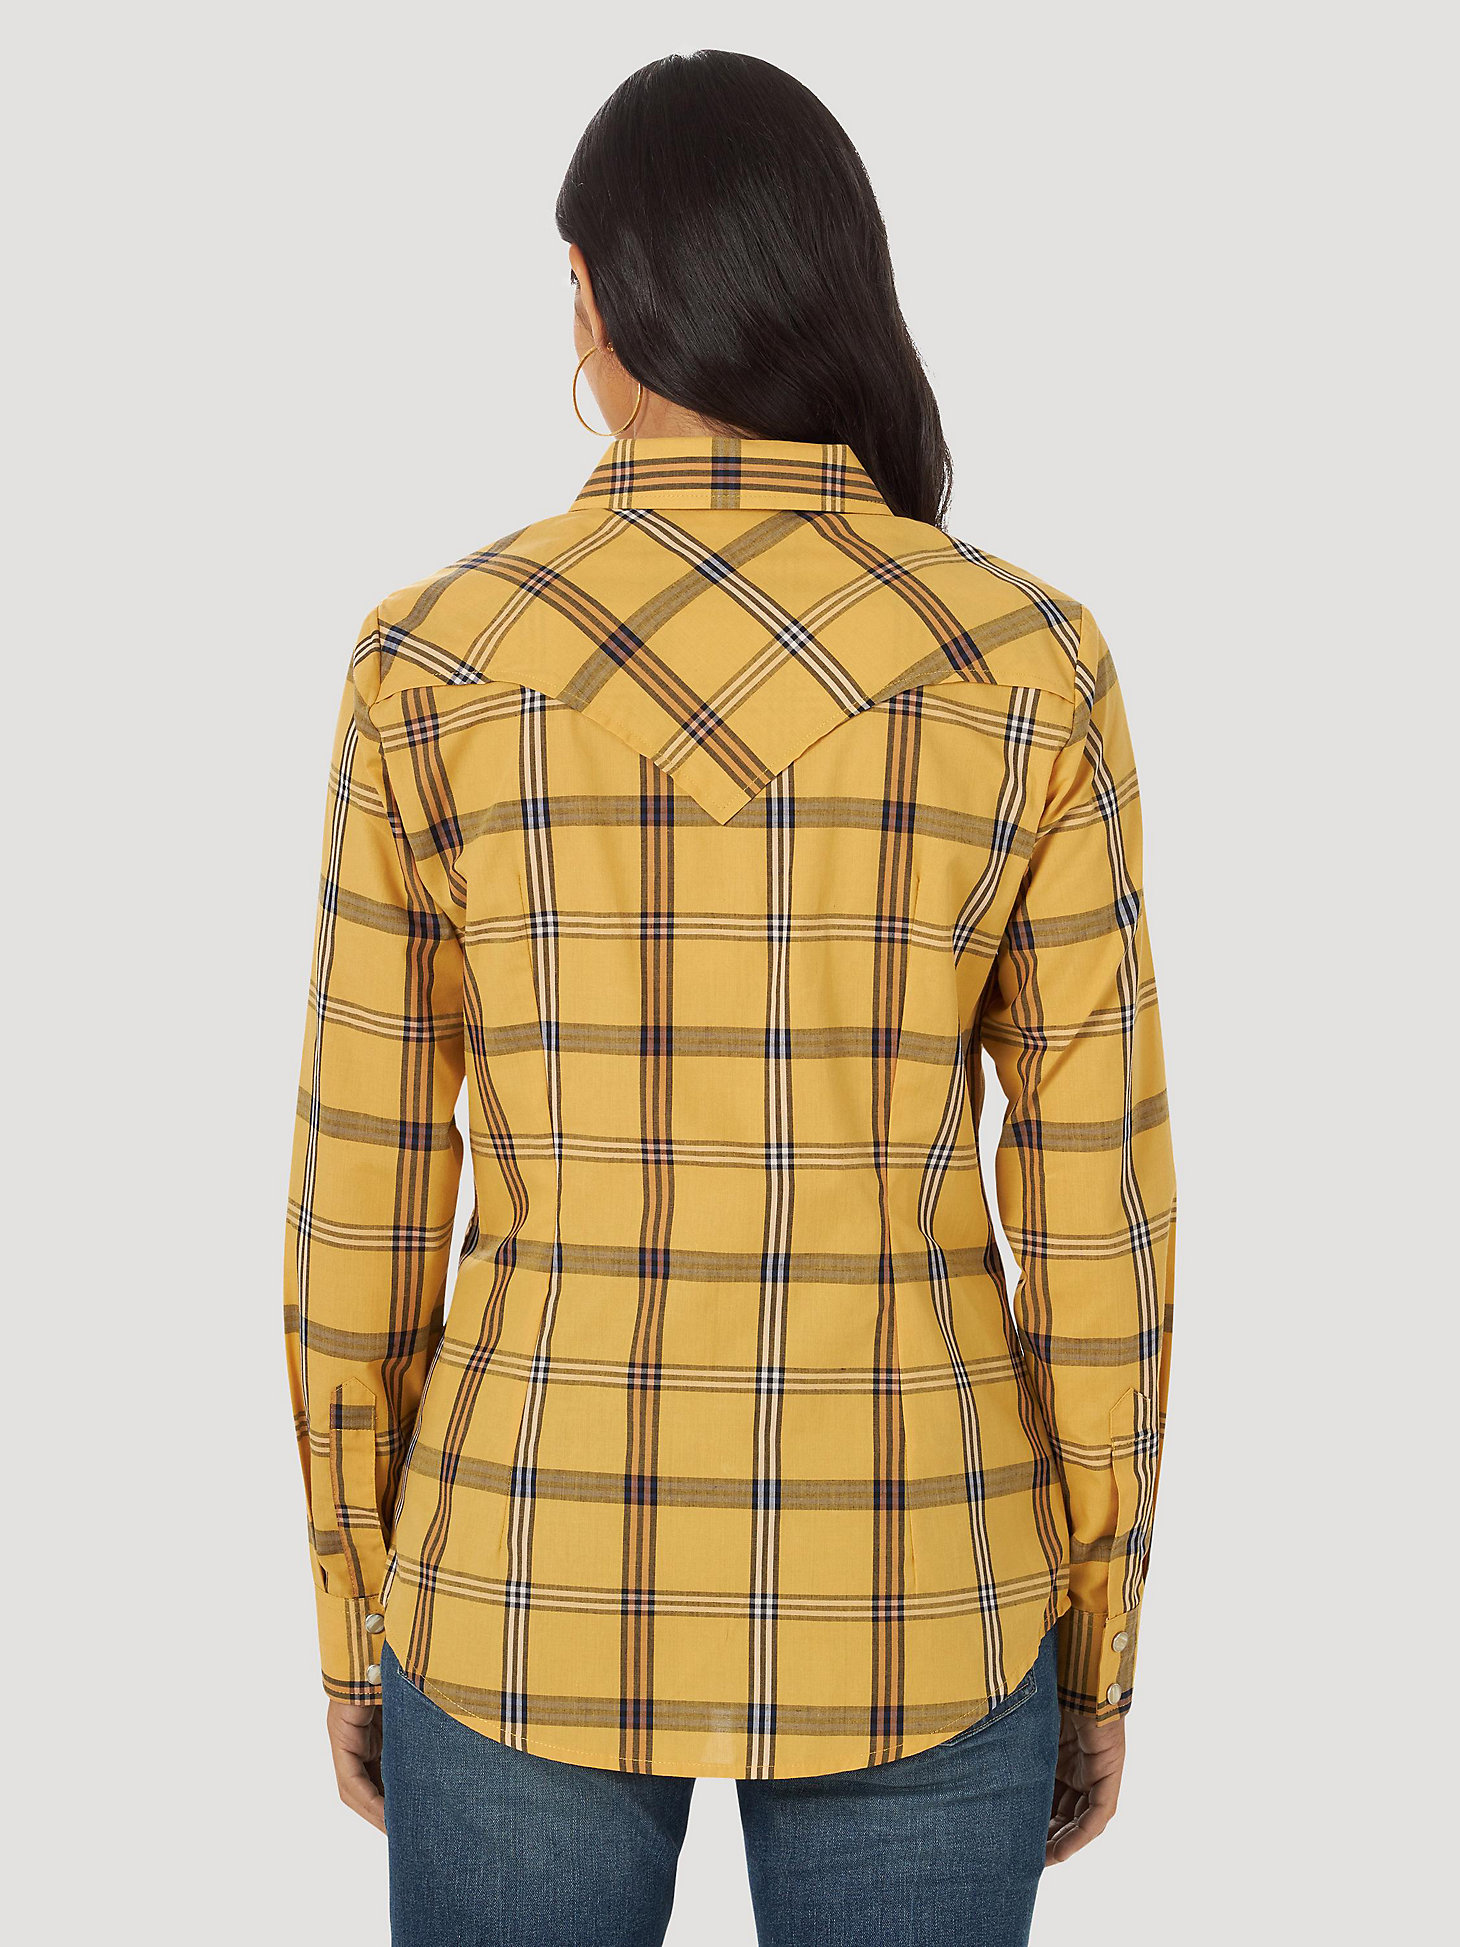 Women's Essential Long Sleeve Plaid Western Snap Top in Yellow alternative view 1